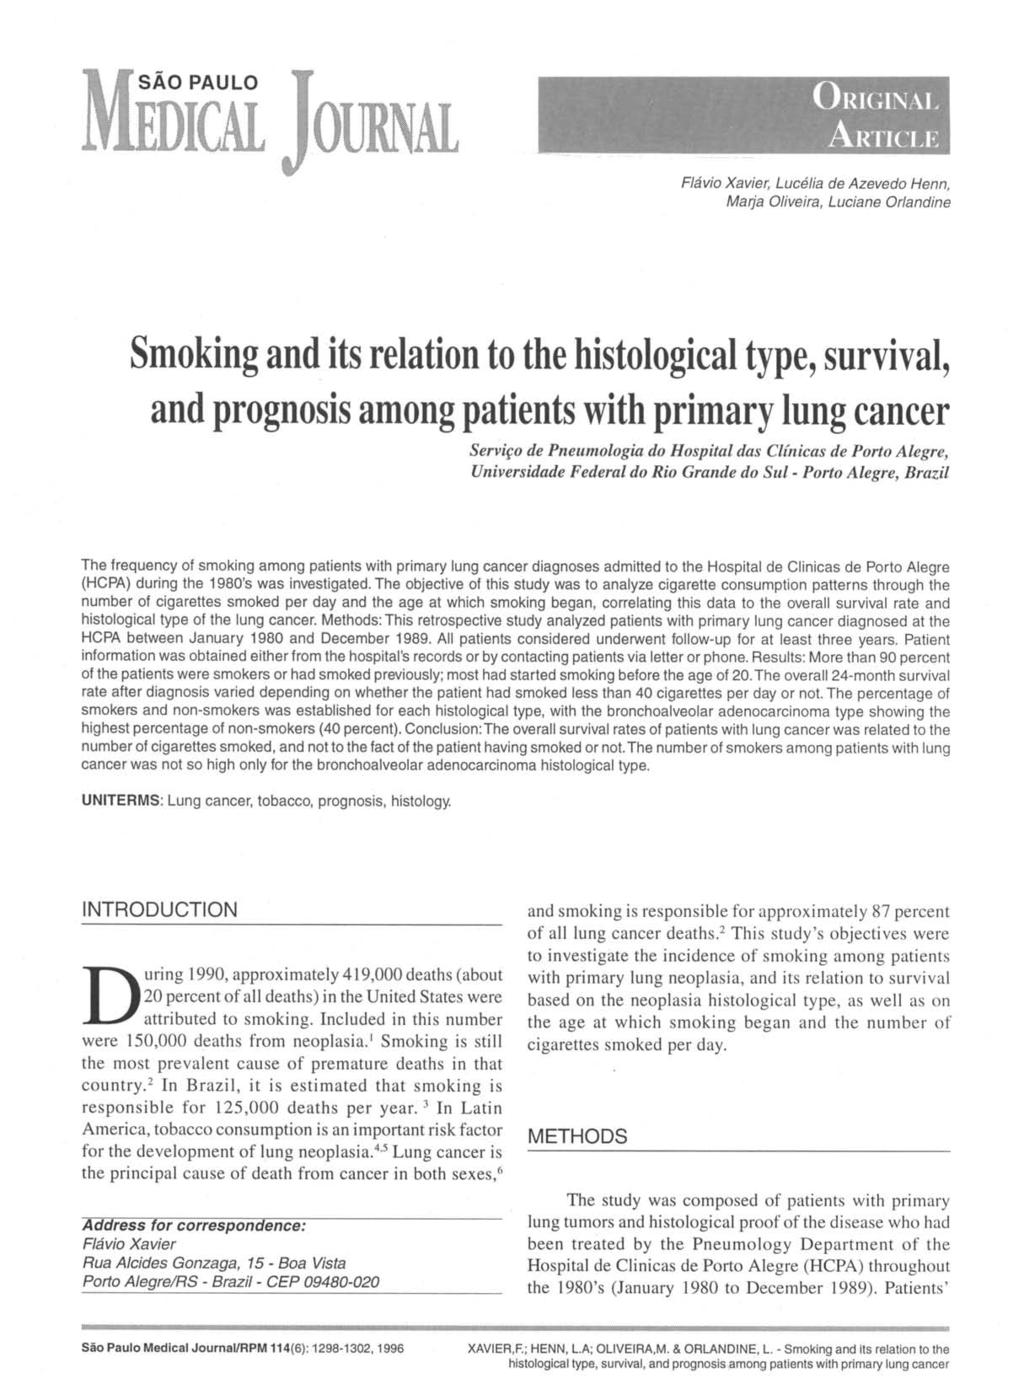 Flavio Xavier, Lucelia de Azevedo Henn, Marja Oliveira, Luciane Orlandine Smoking and its relation to the histological type, survival, and prognosis among patients with primary lung cancer Servifo de